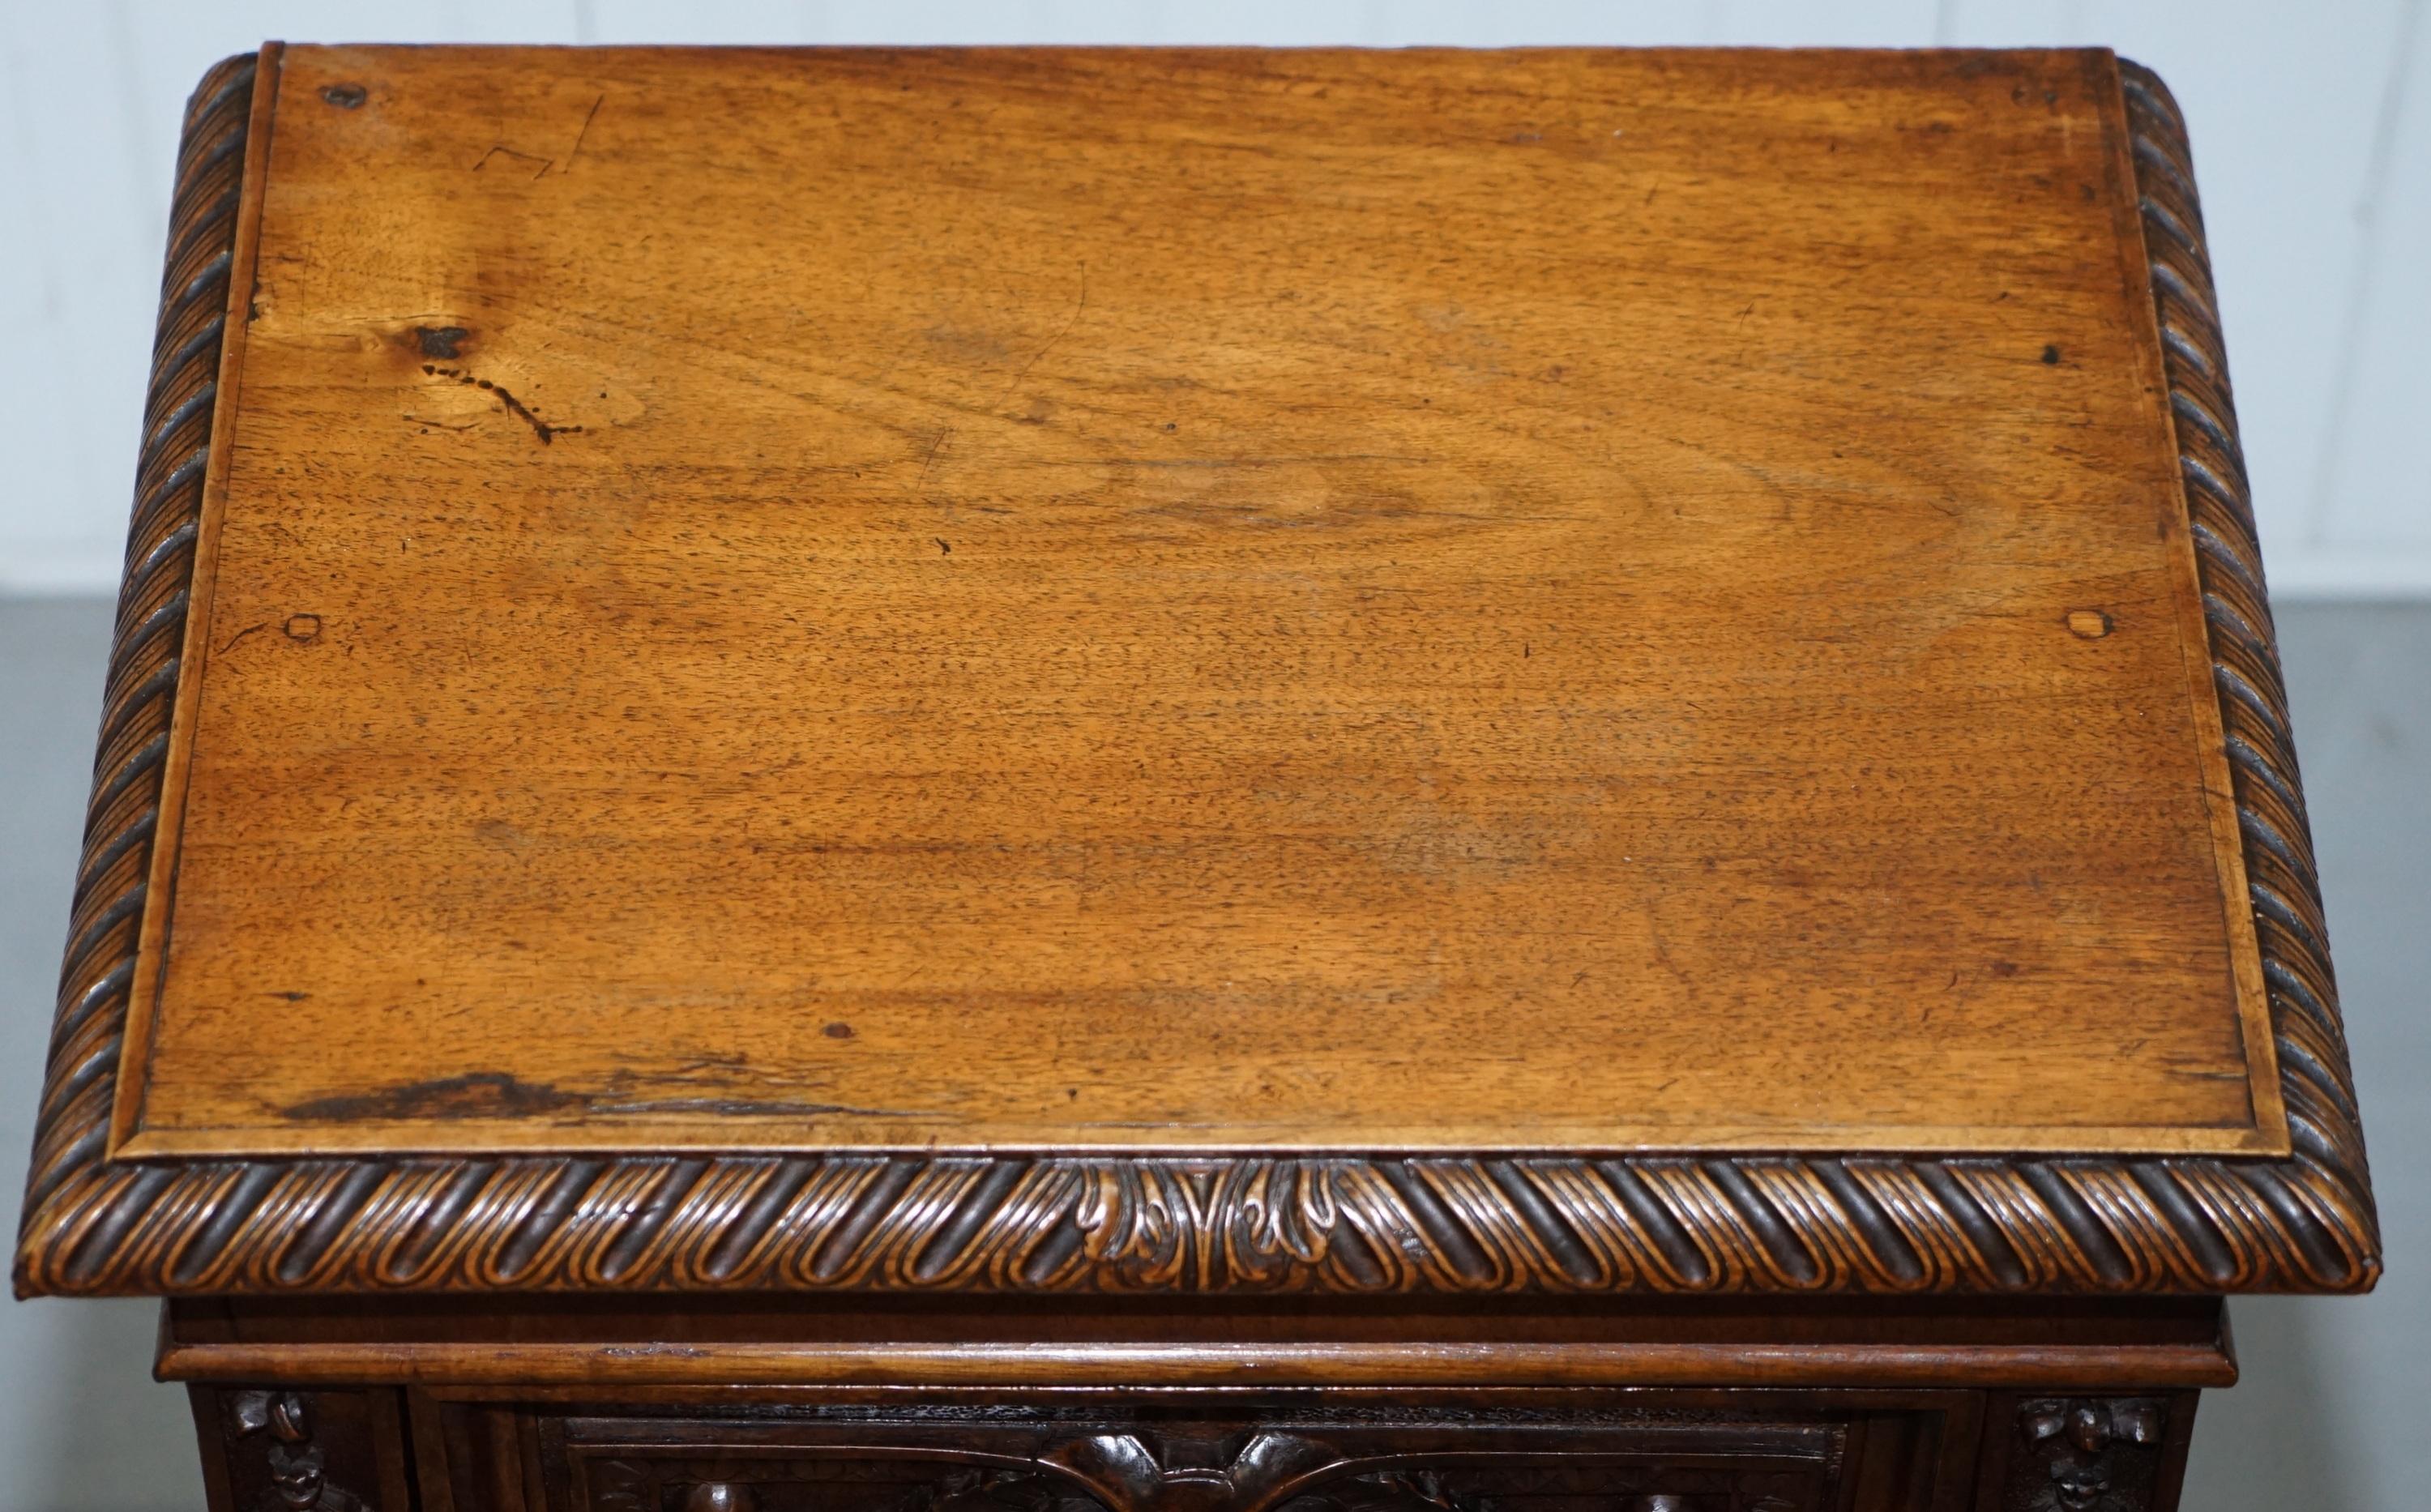 English Stunning circa 1780 Carved Walnut Side Cabinet with Cherub & Floral Detailing